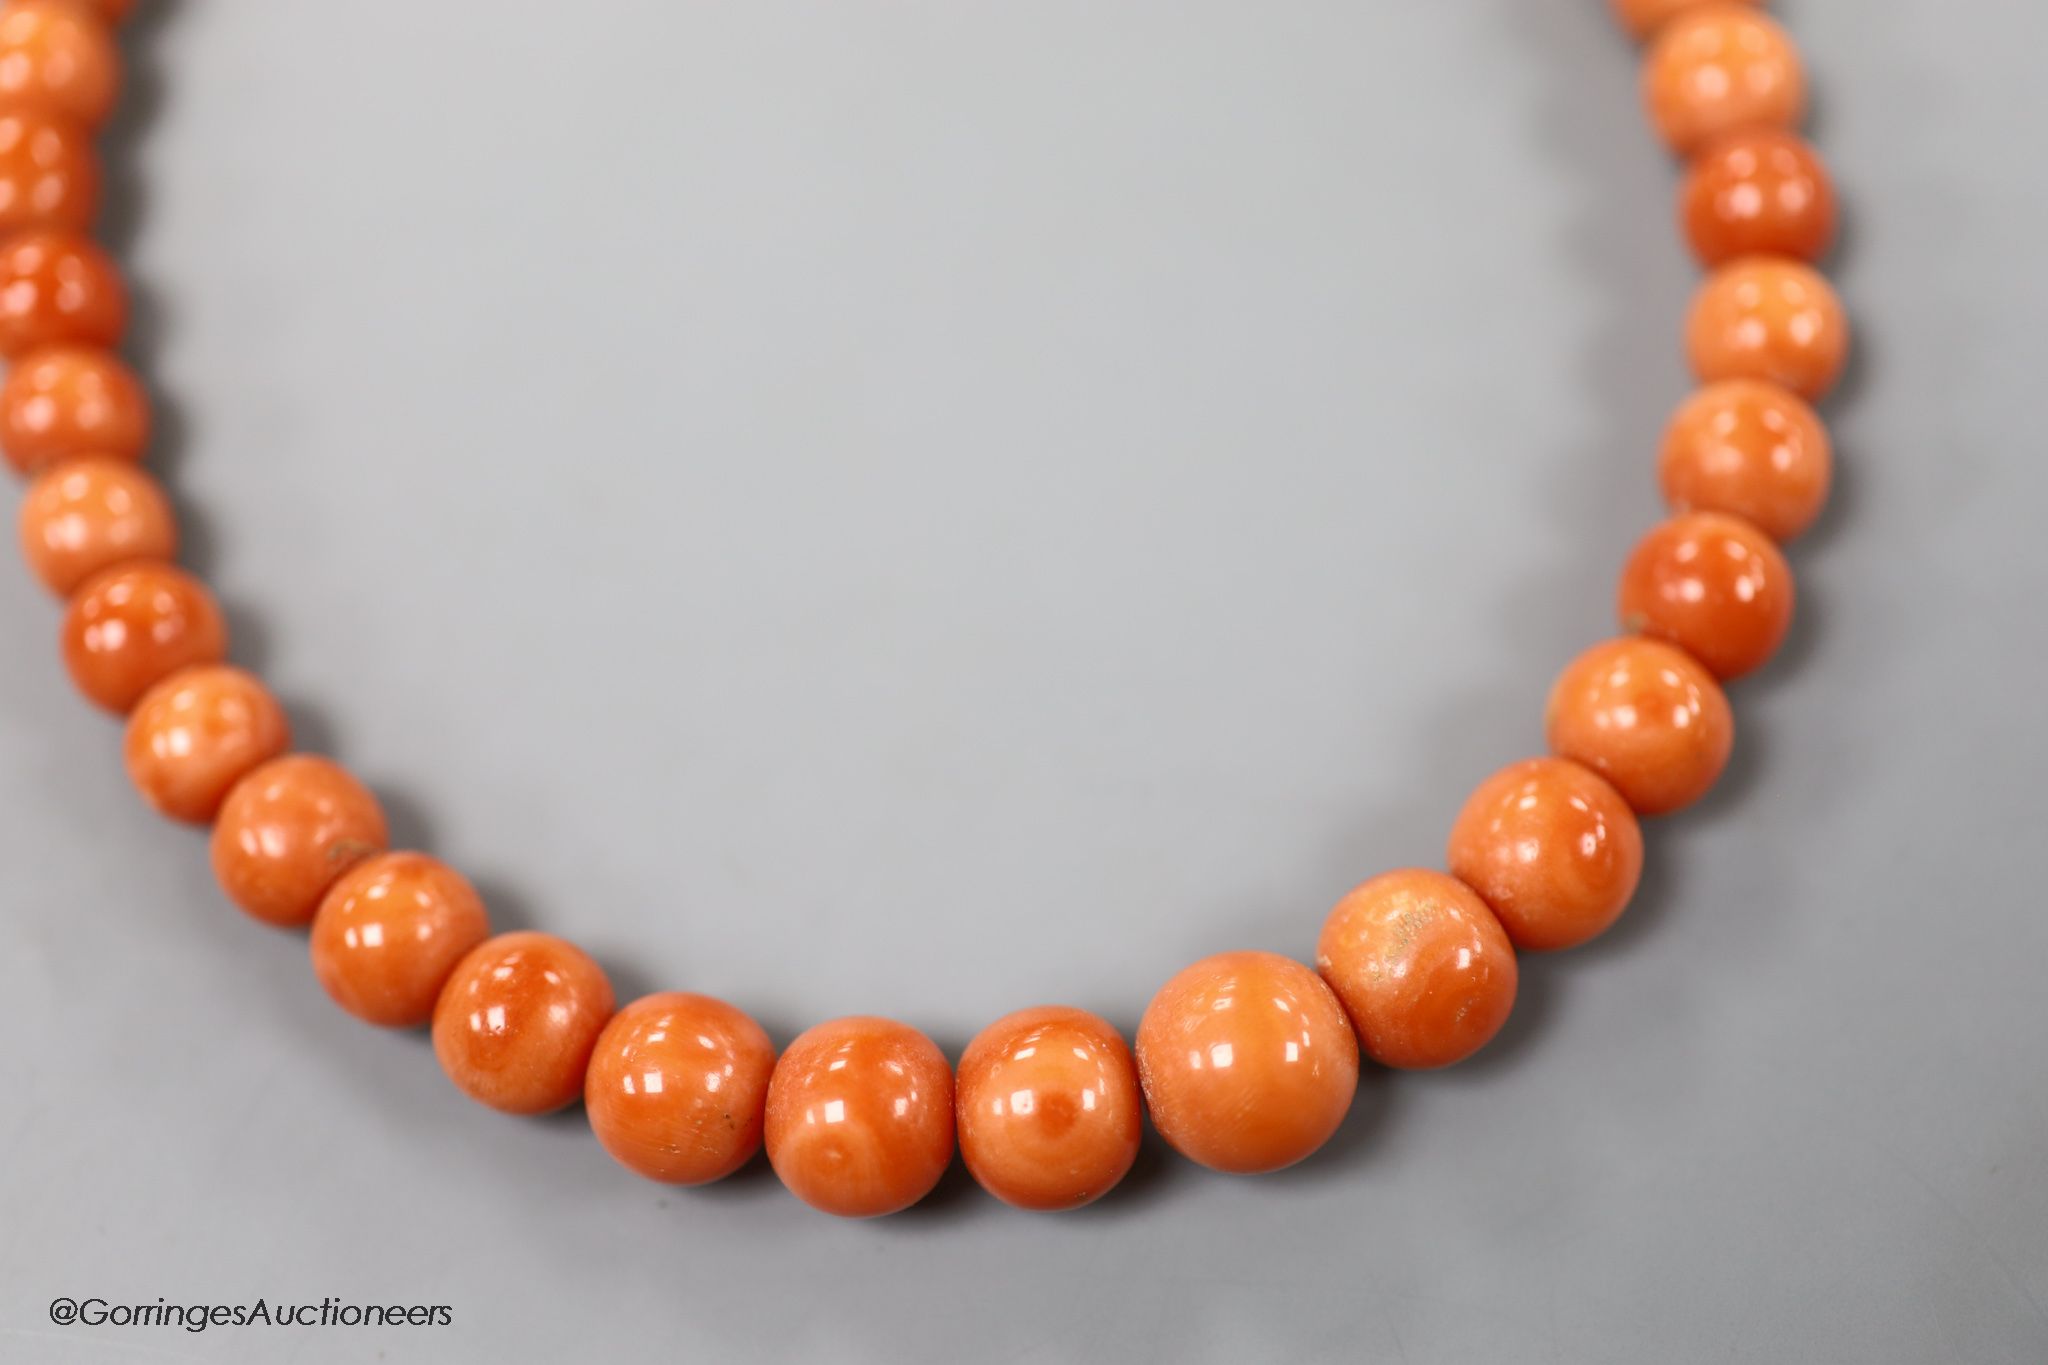 A single strand graduated coral bead choker necklace, 36cm, gross weight 63 grams.